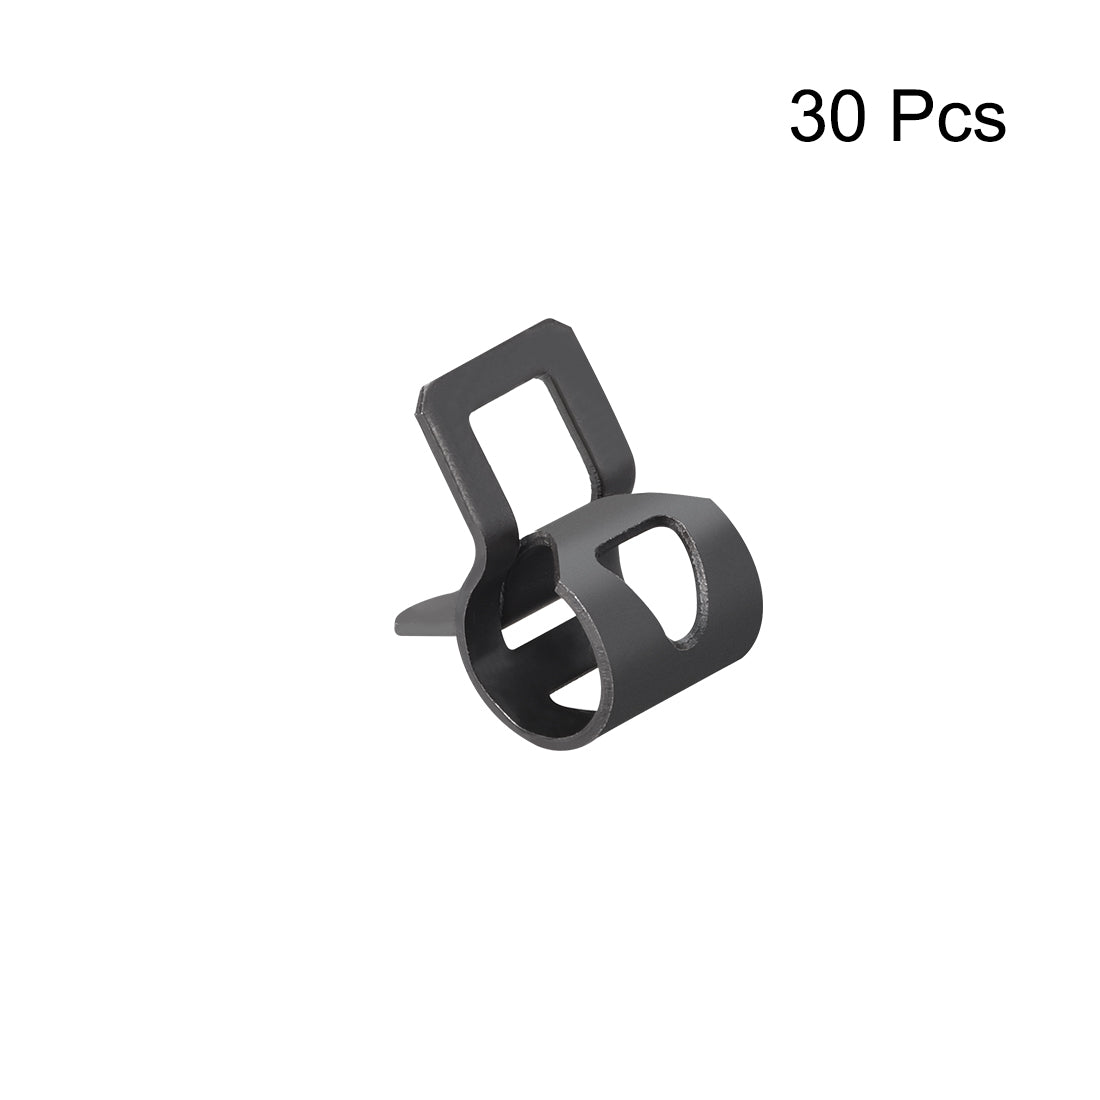 Uxcell Uxcell Steel Band Clamp 11mm for Fuel Line Silicone Hose Tube Spring Clips Clamp Black Manganese Steel 30Pcs